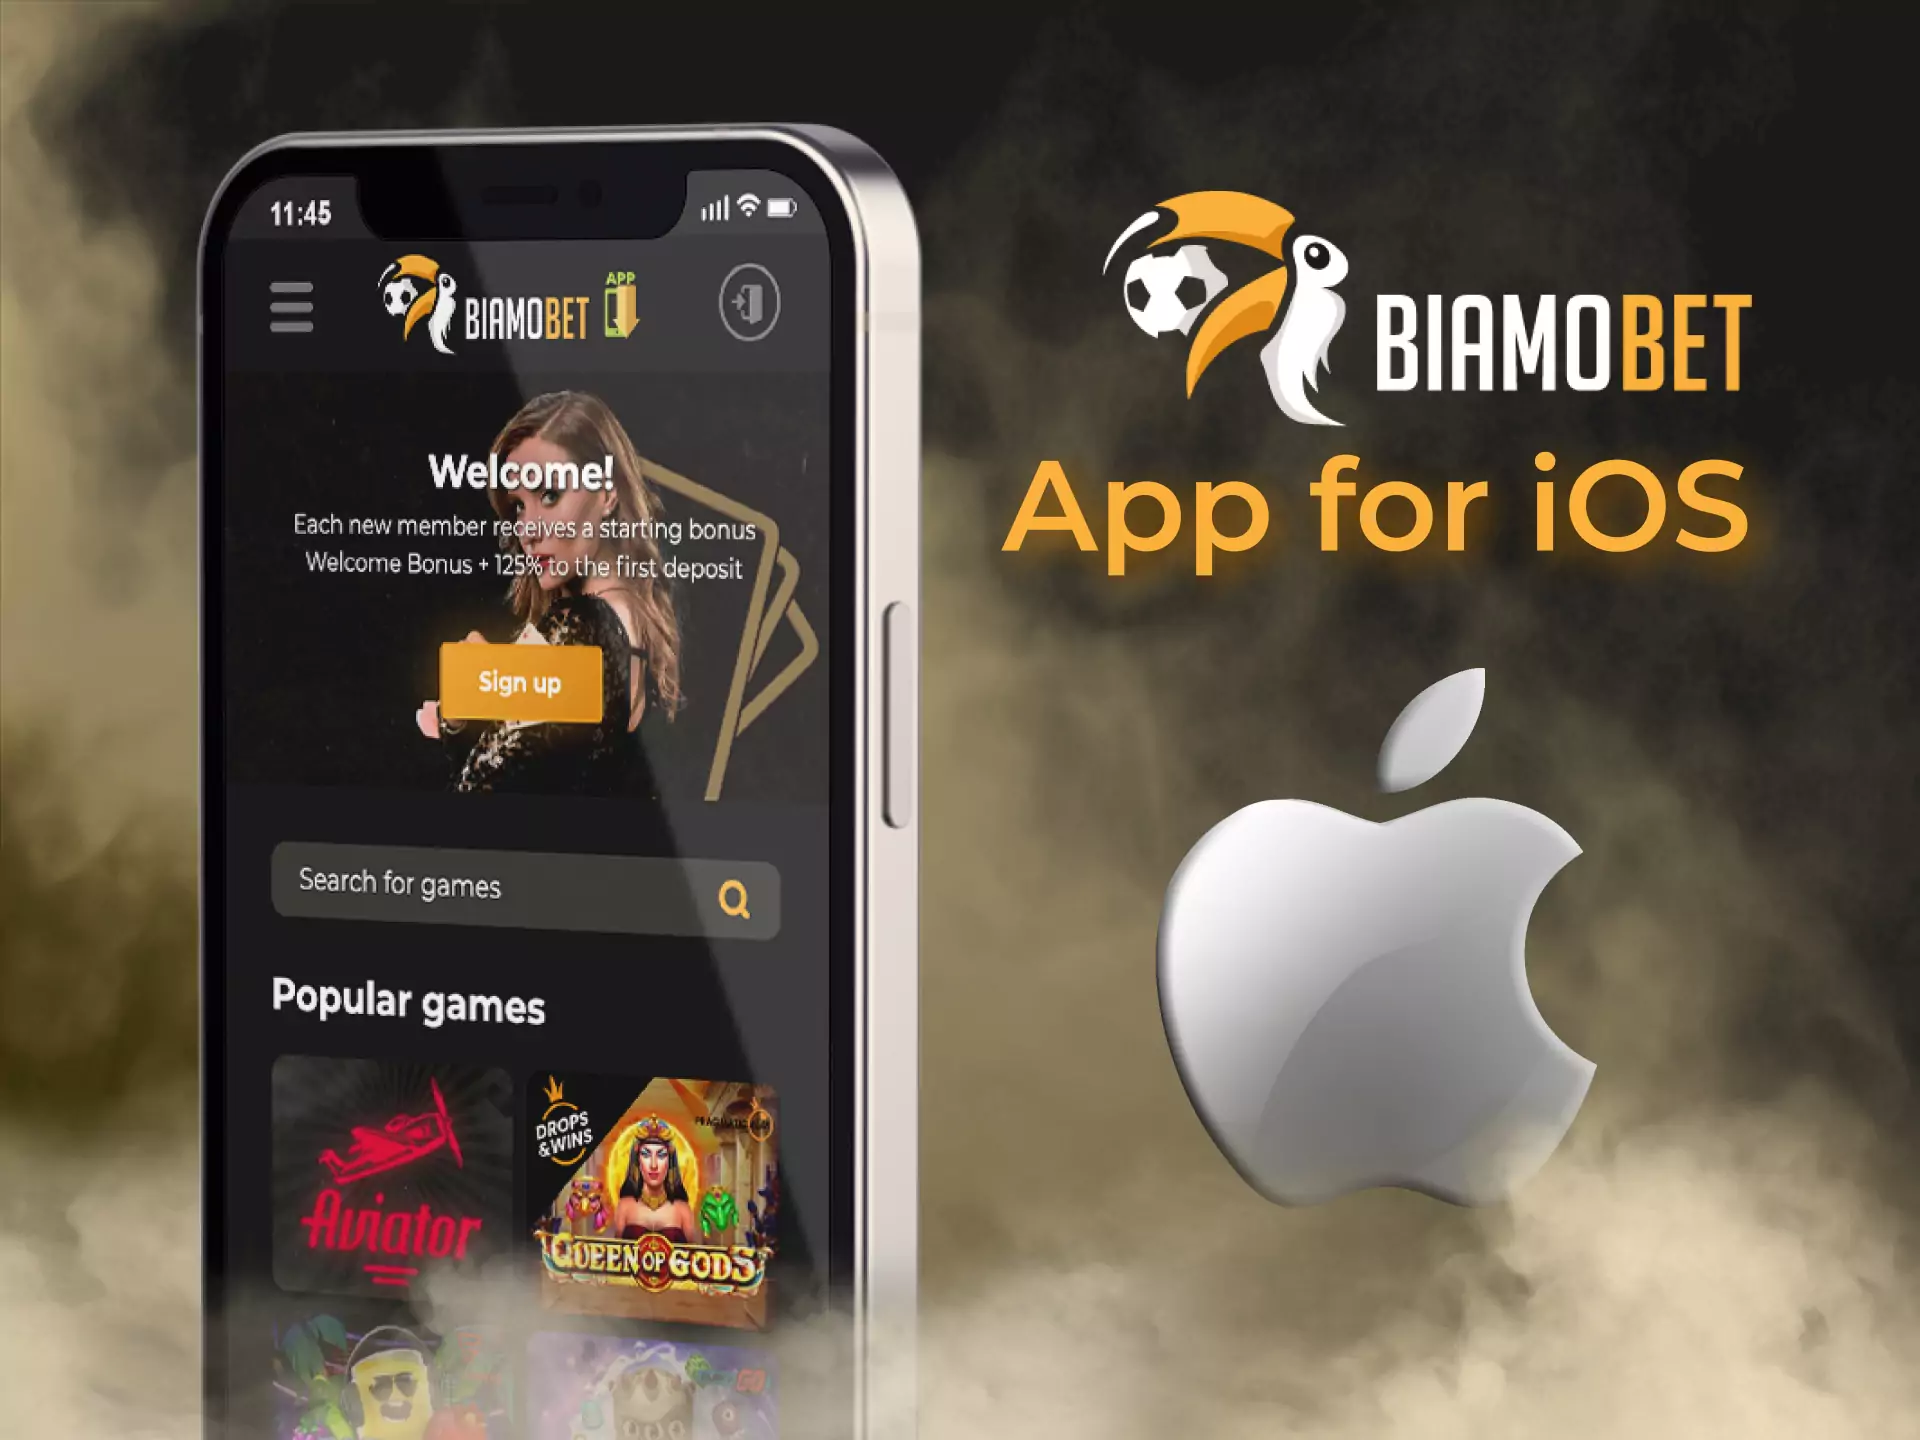 There is a link for loading the Biamobet for iOS on the official website.